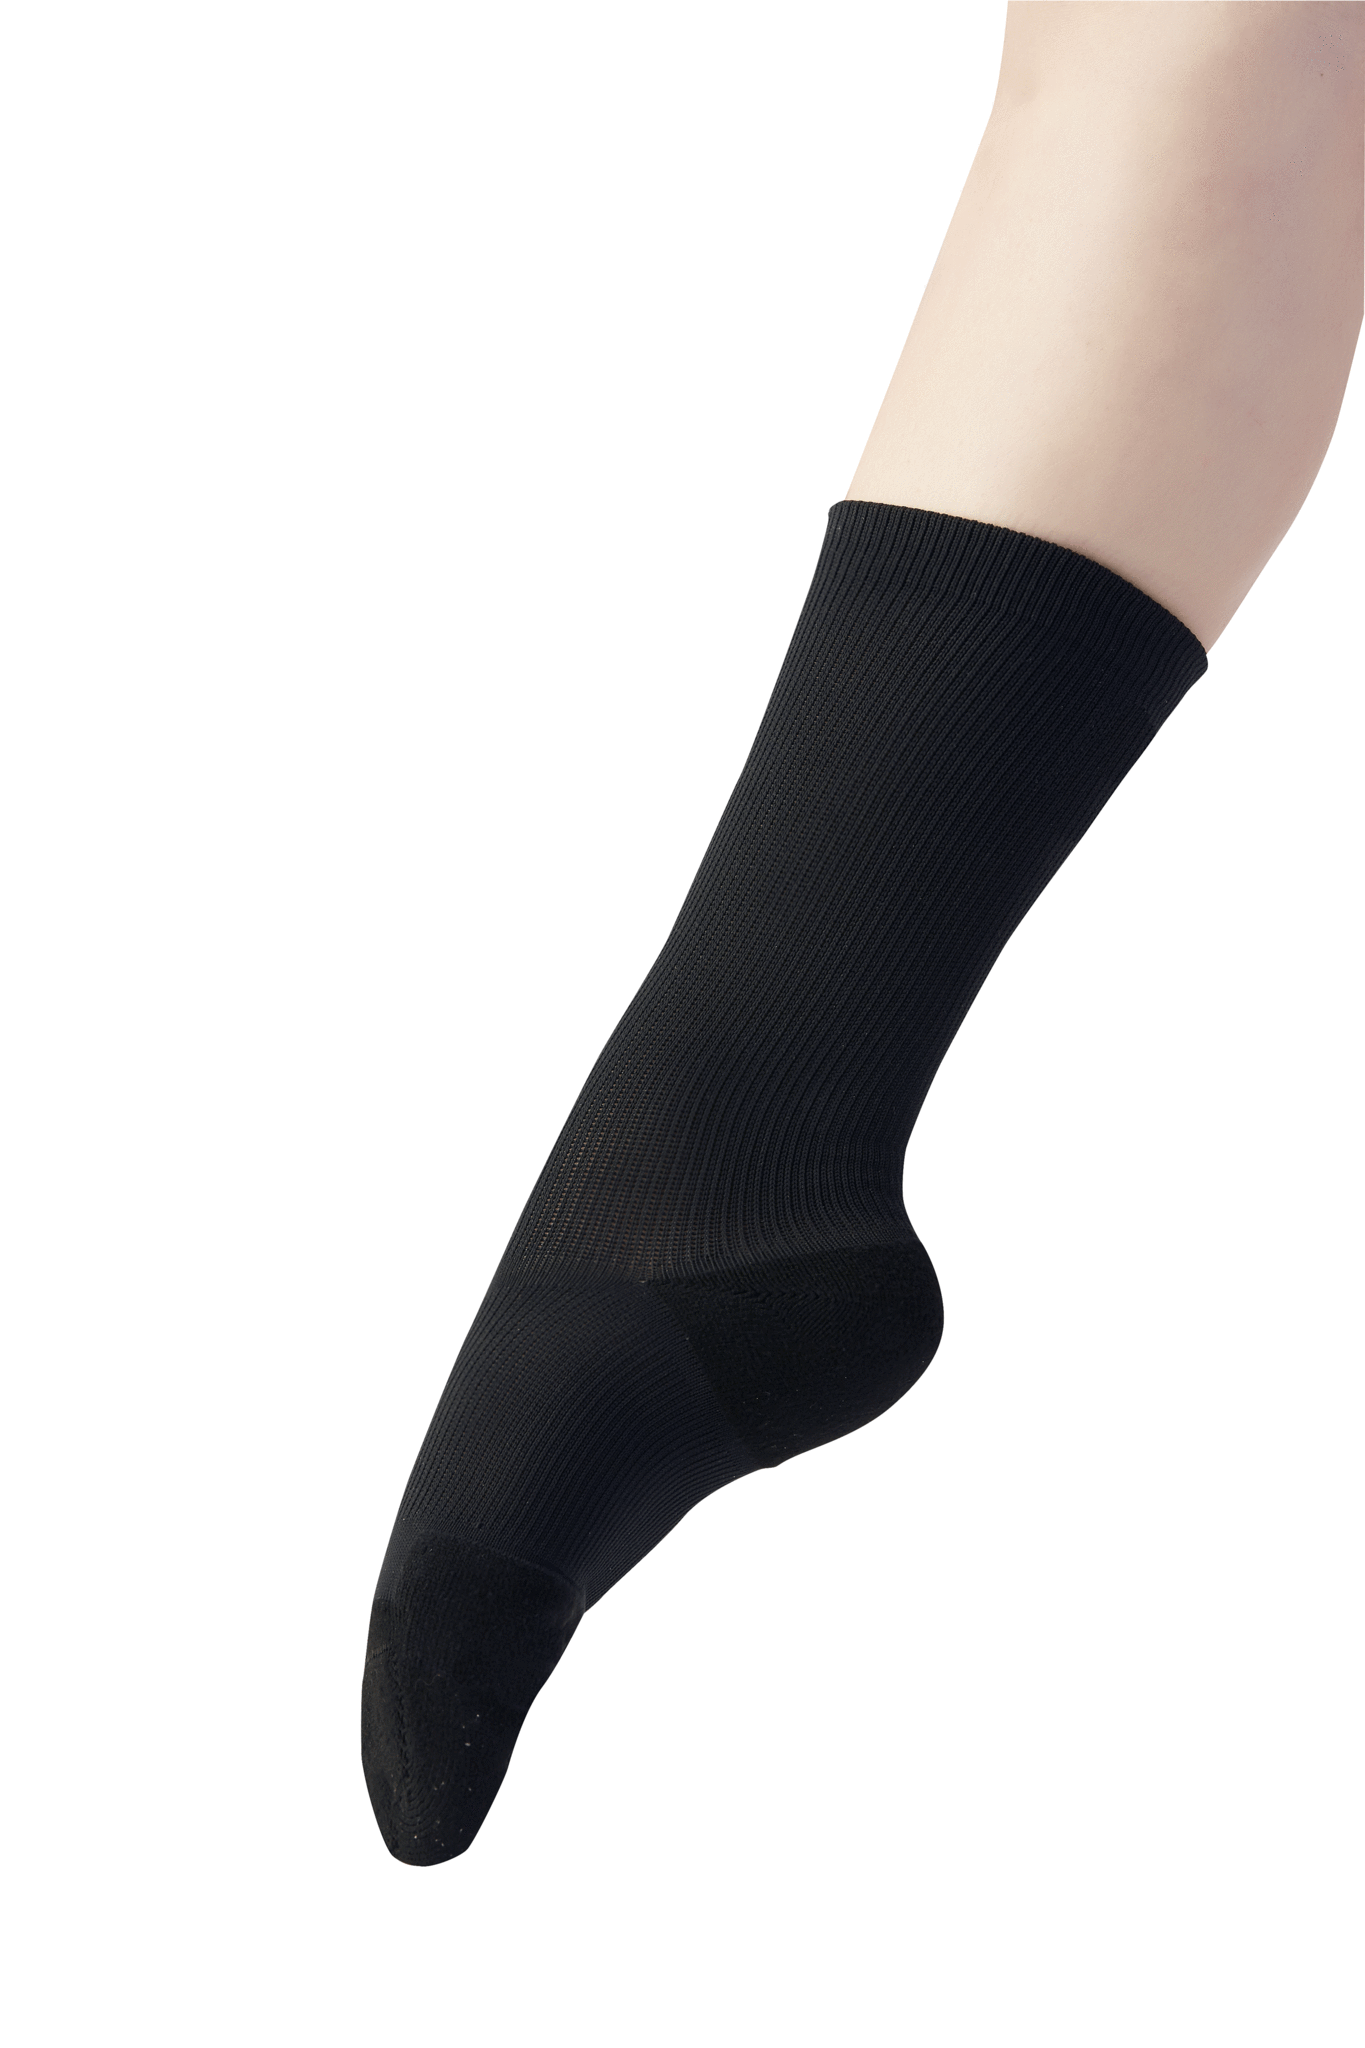 Apolla The Alpha Shock Half Sole Compression With Traction Dance